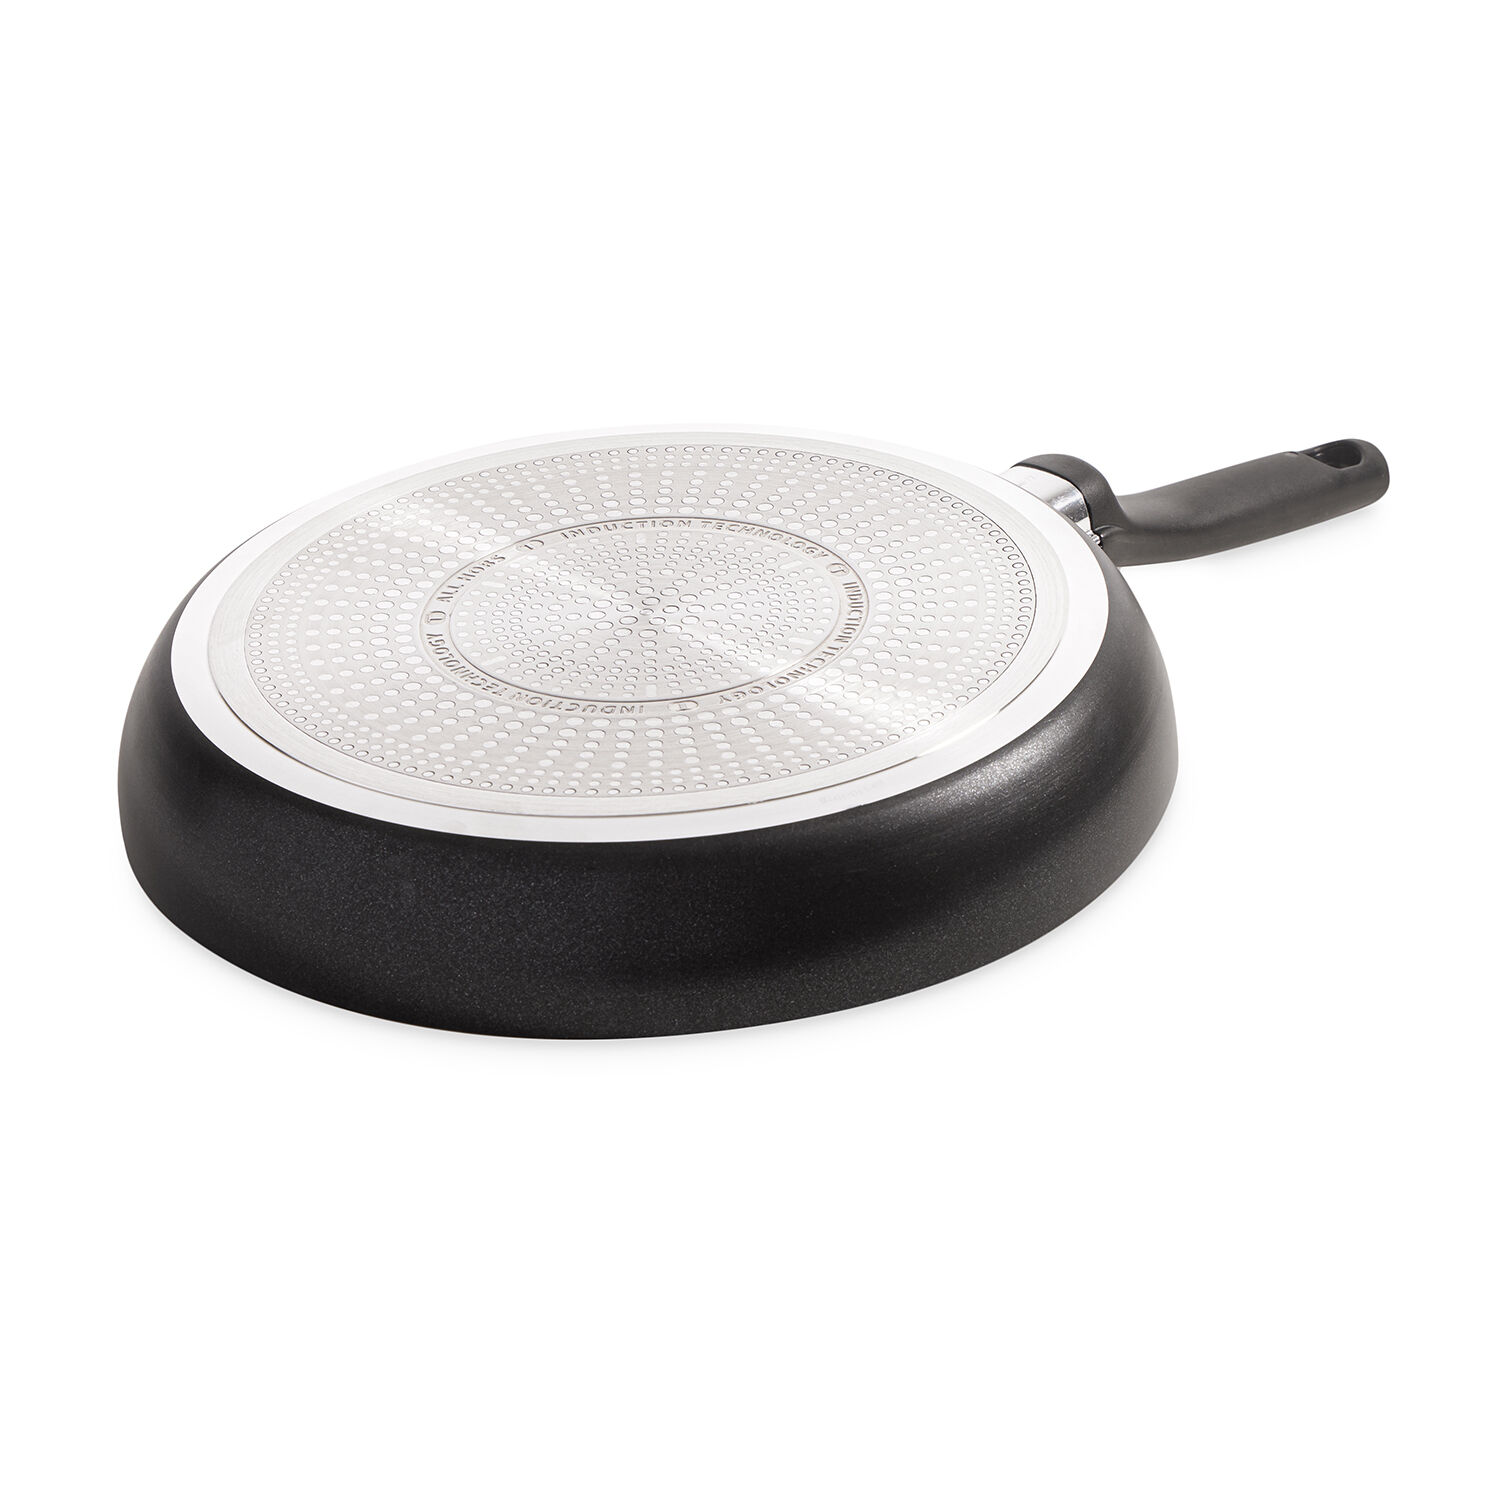 TEFAL Tefal Unlimited ON Induction 32cm Non-Stick Frying Pan